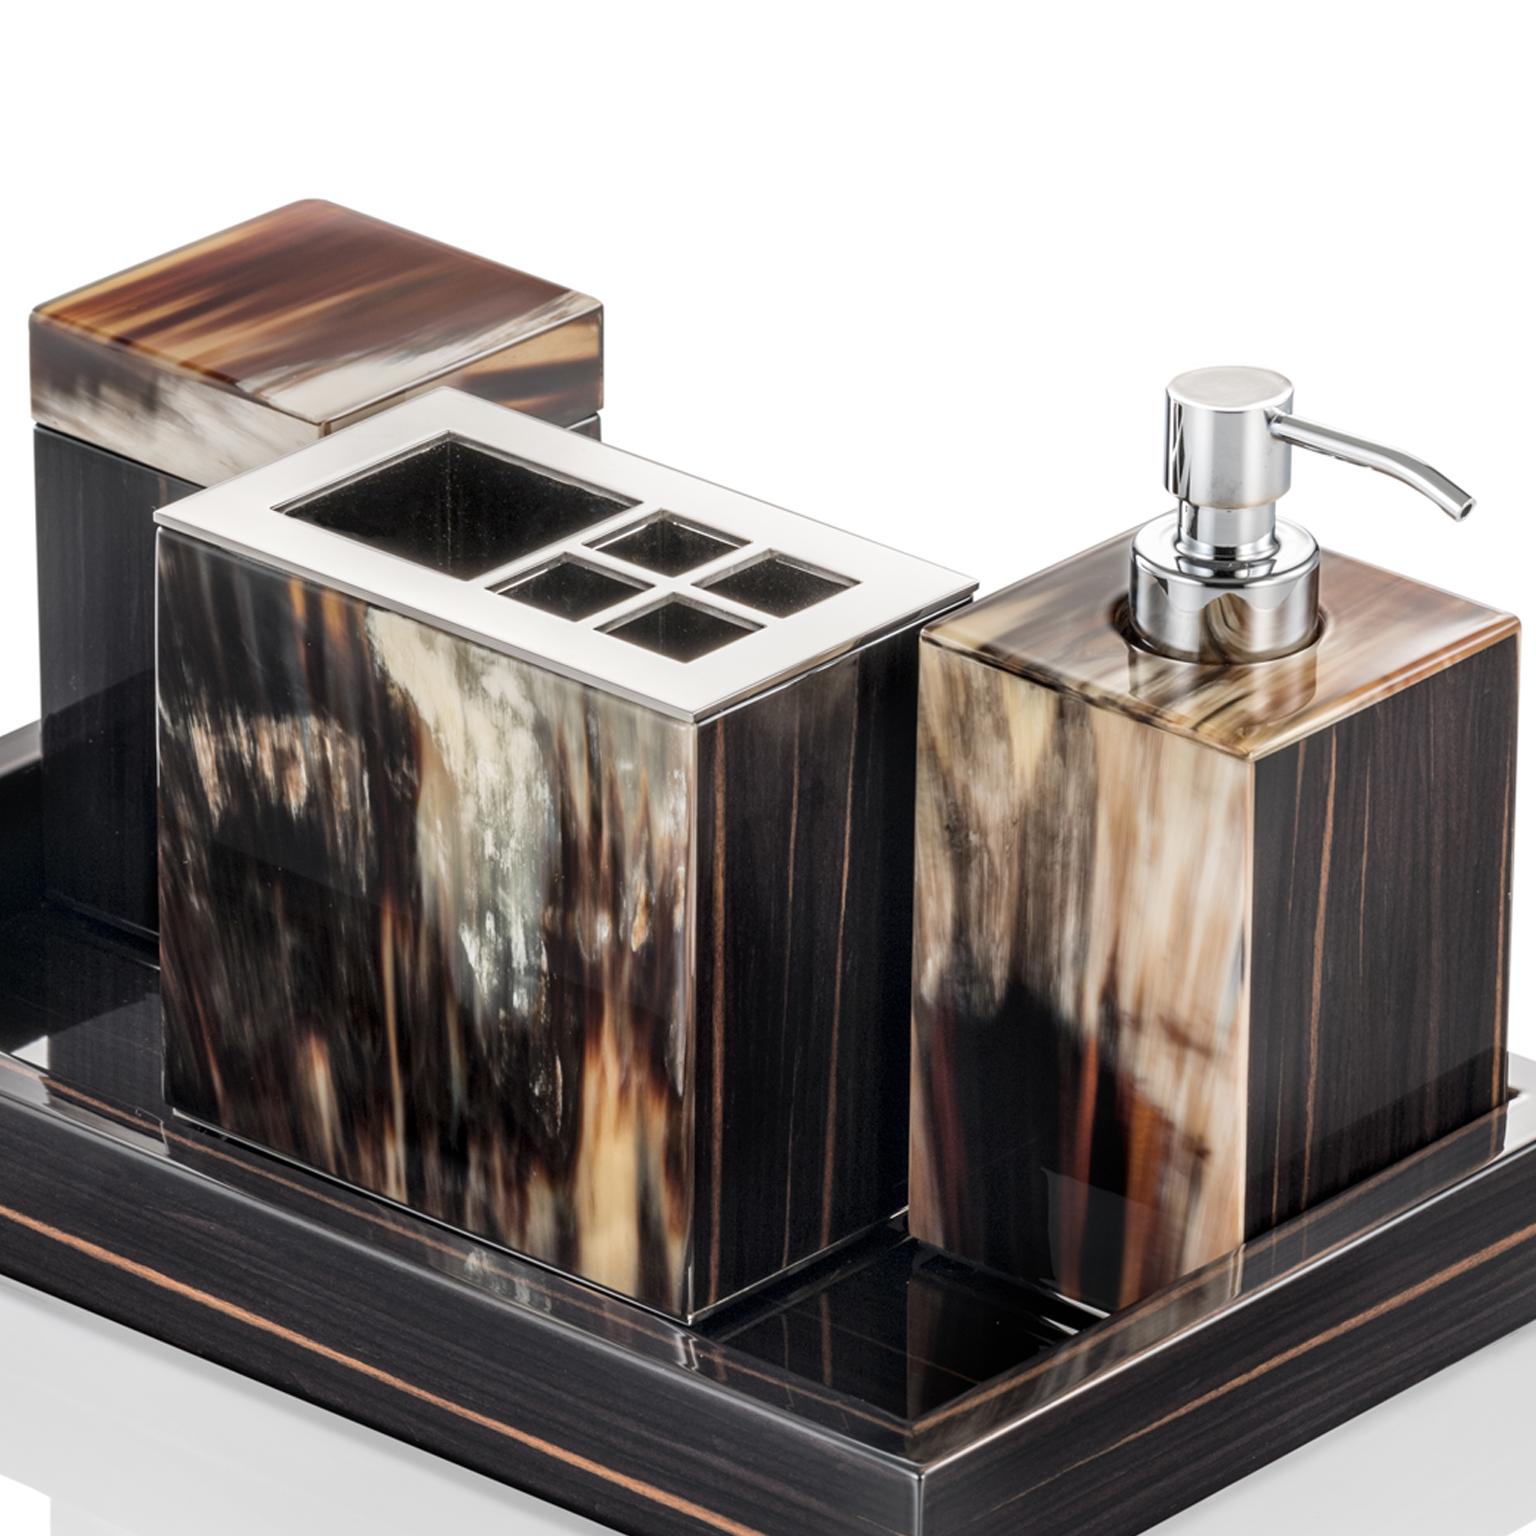 Minimalist yet decorative, the Iris soap dispenser is a must-have complement to any elegant bathroom. Crafted of glossy ebony and chromed brass, the sleek design is embellished by unique inlays in Corno Italiano boasting dreamy hues.

Note: Colors